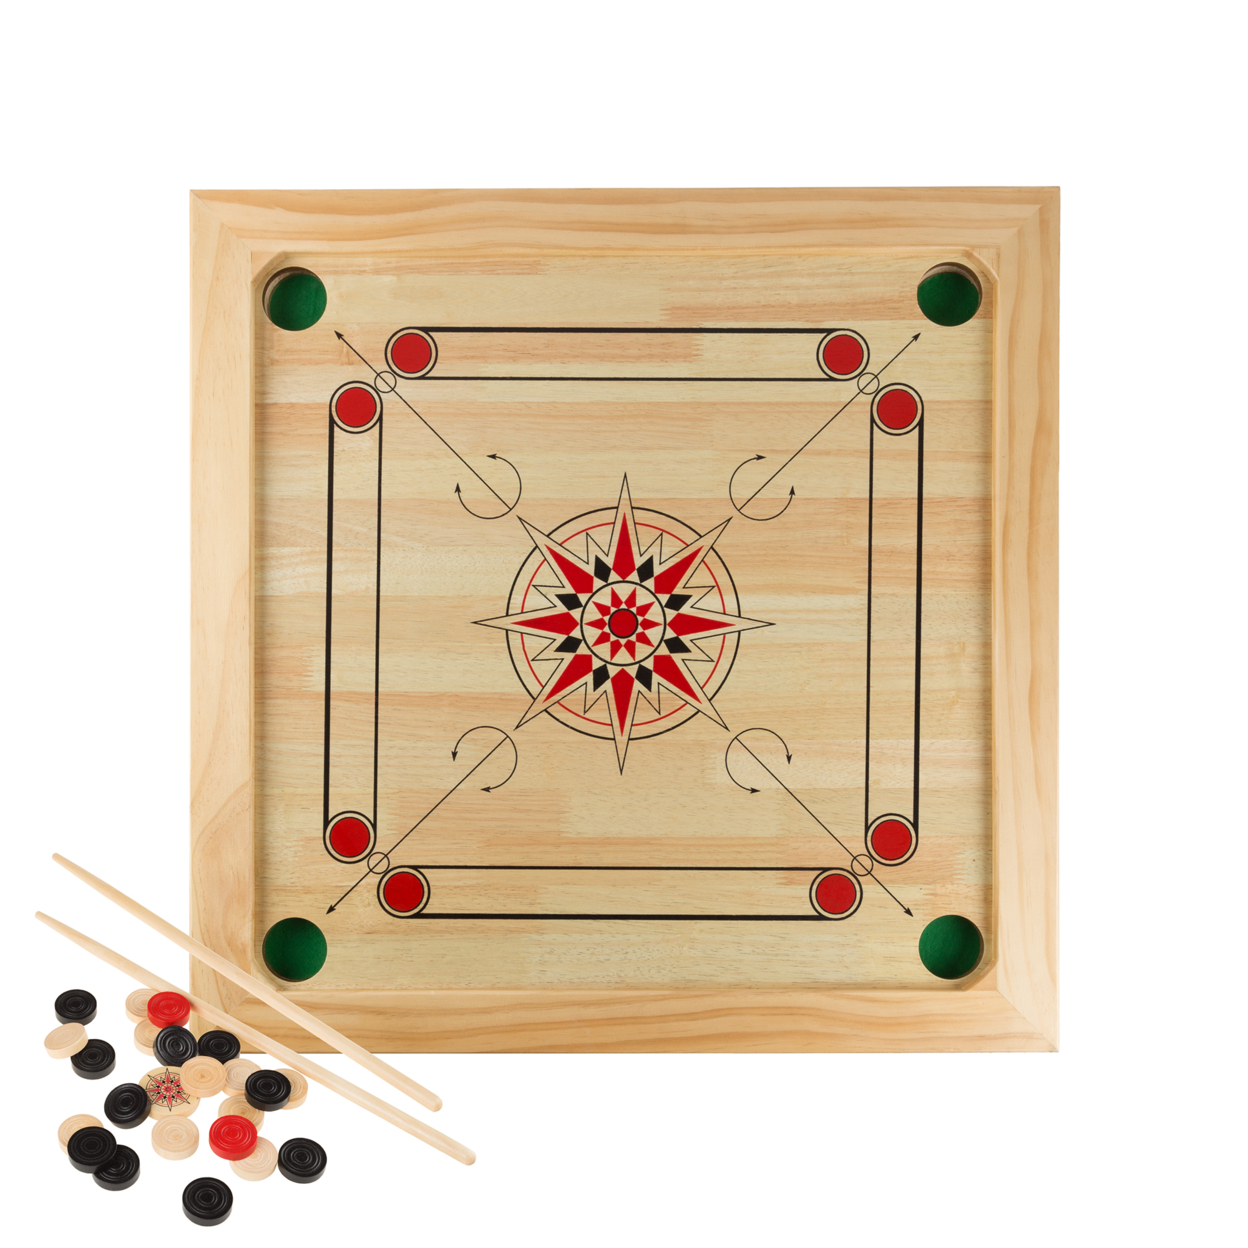 Carrom Board Game Classic Strike And Pocket Table Game With Cue Sticks, Like Table Shuffleboard Or Finger Billiards